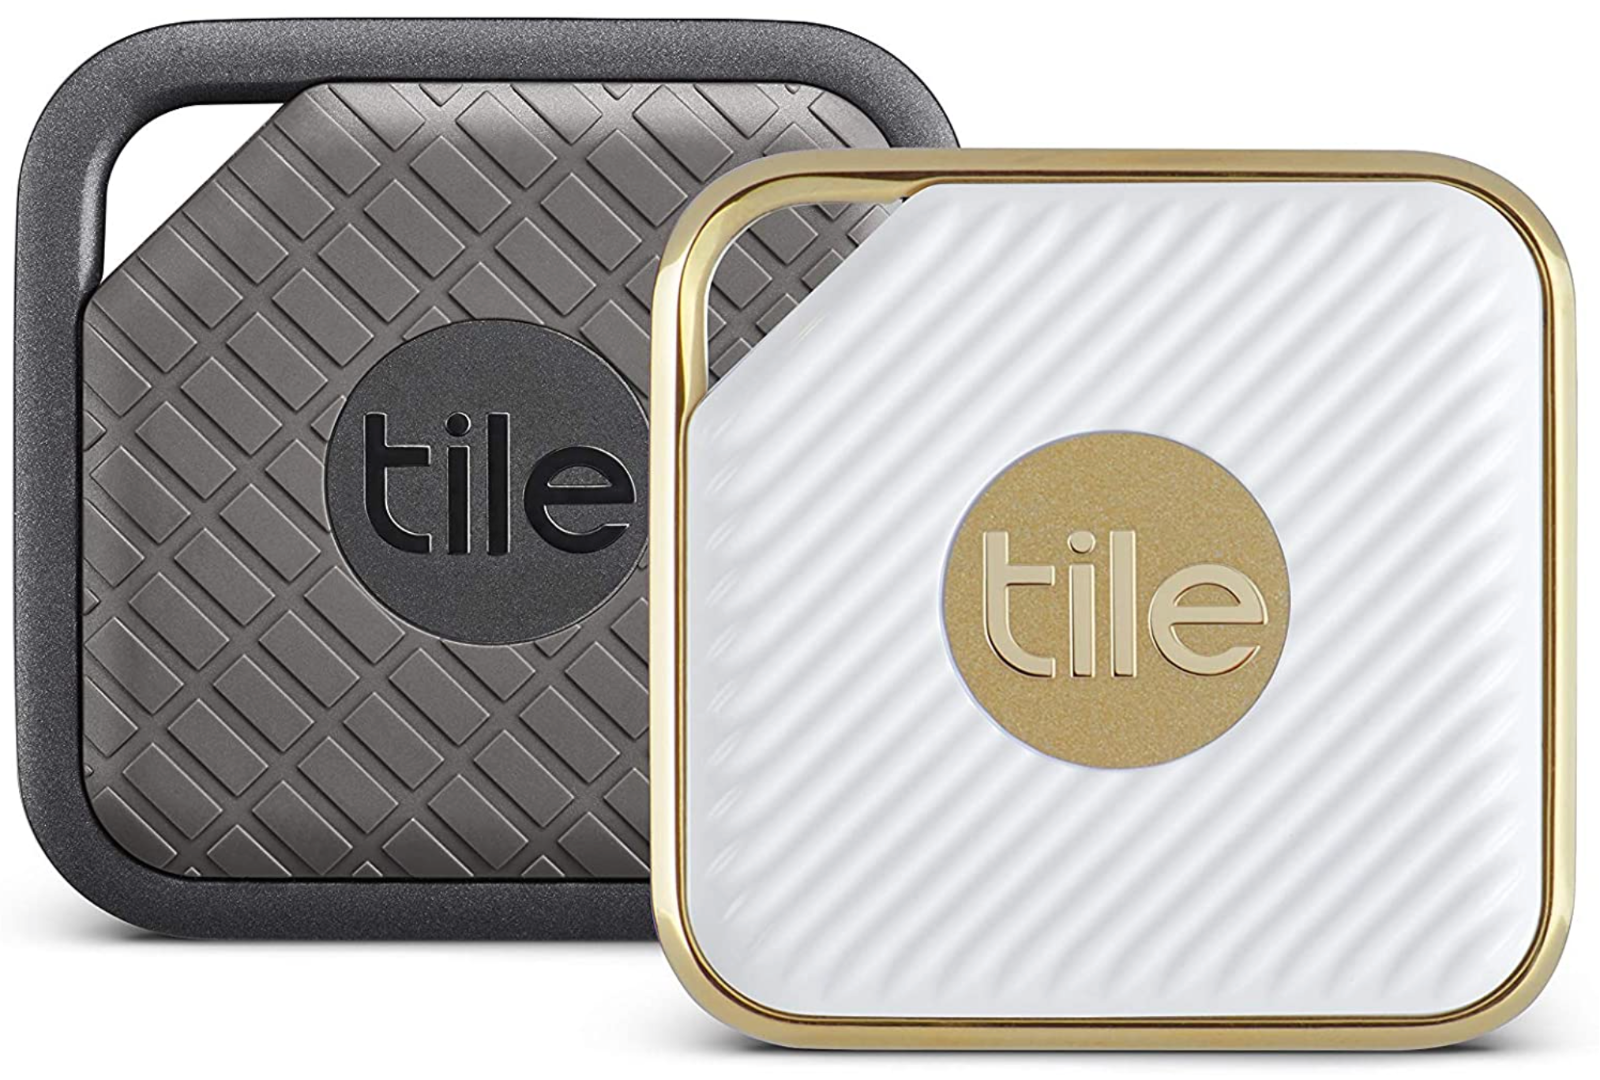 Tile Style and Sport 40％OFFの激安セール combo 1 最大78％オフ！ 2 -